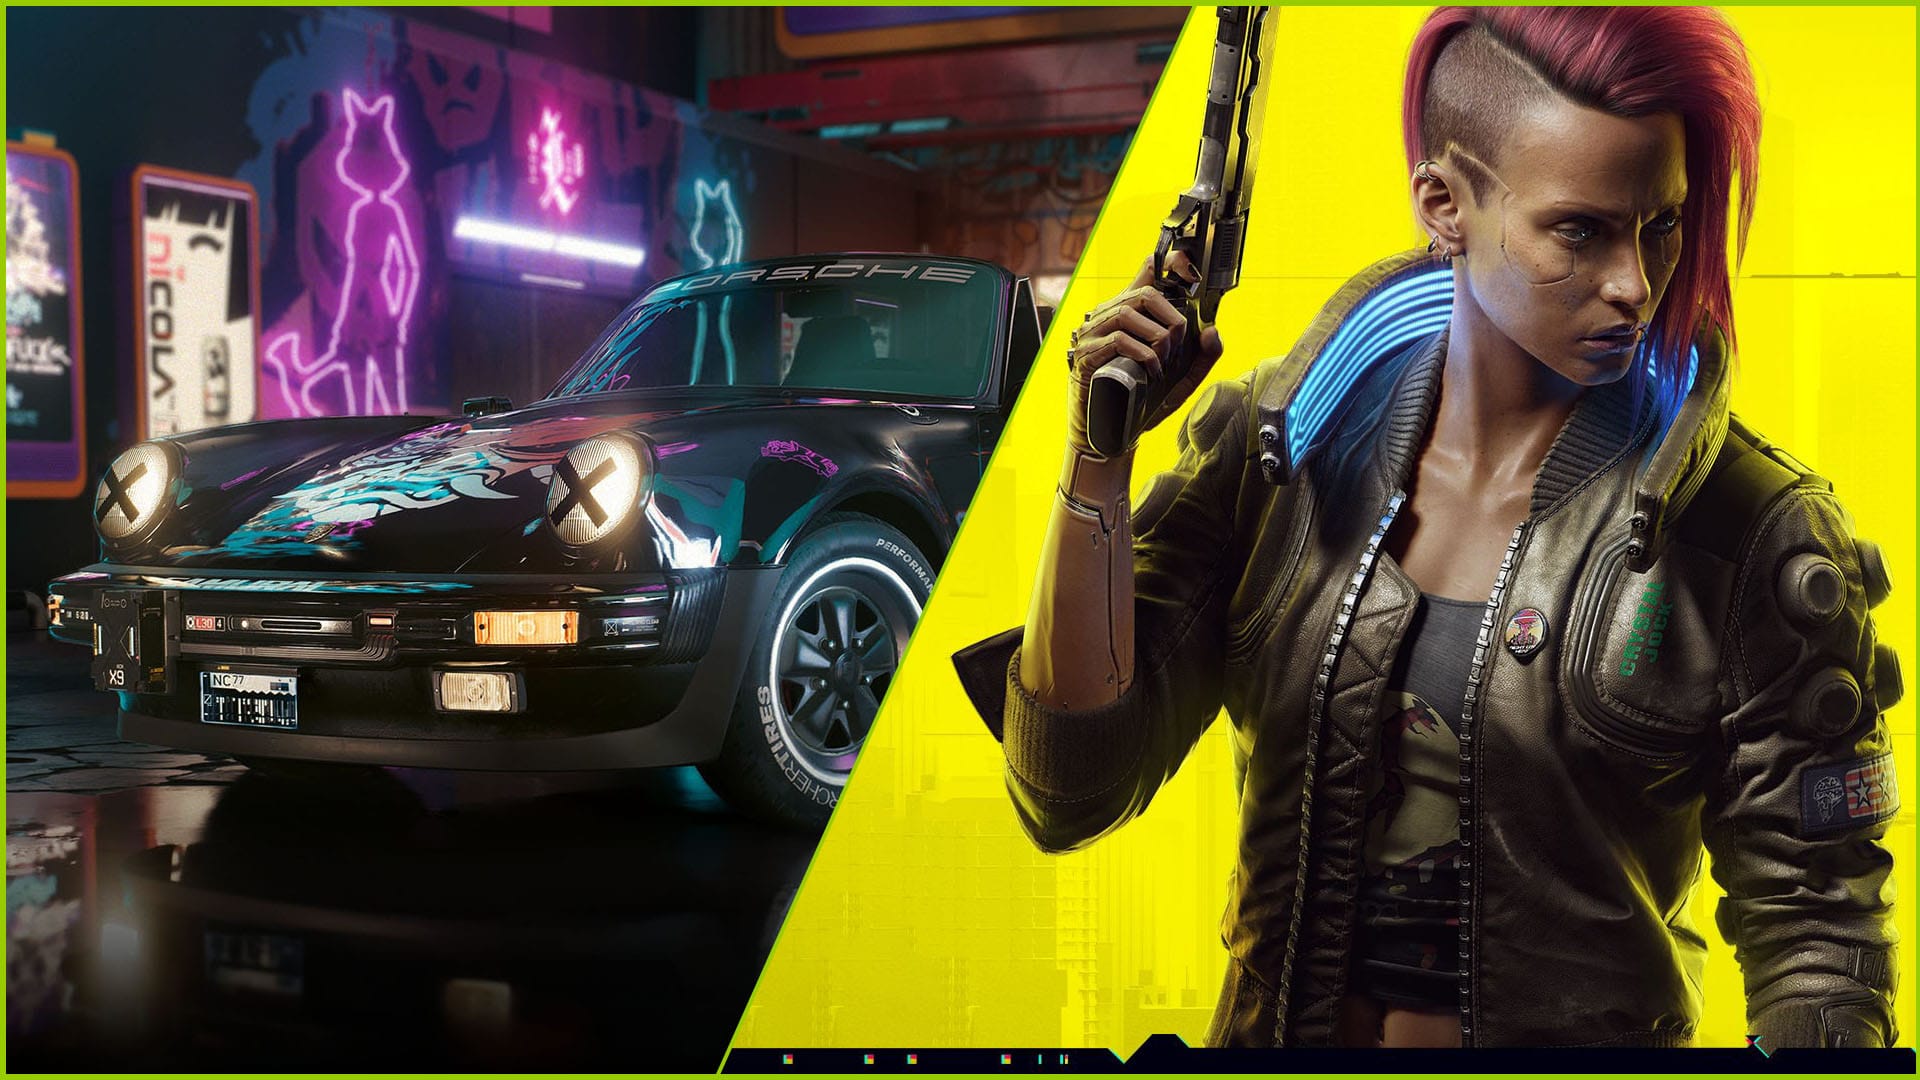 Cyberpunk 2077 Update 2.1 Detailed, Adding Working Metro, Accessibility Options, and Much More